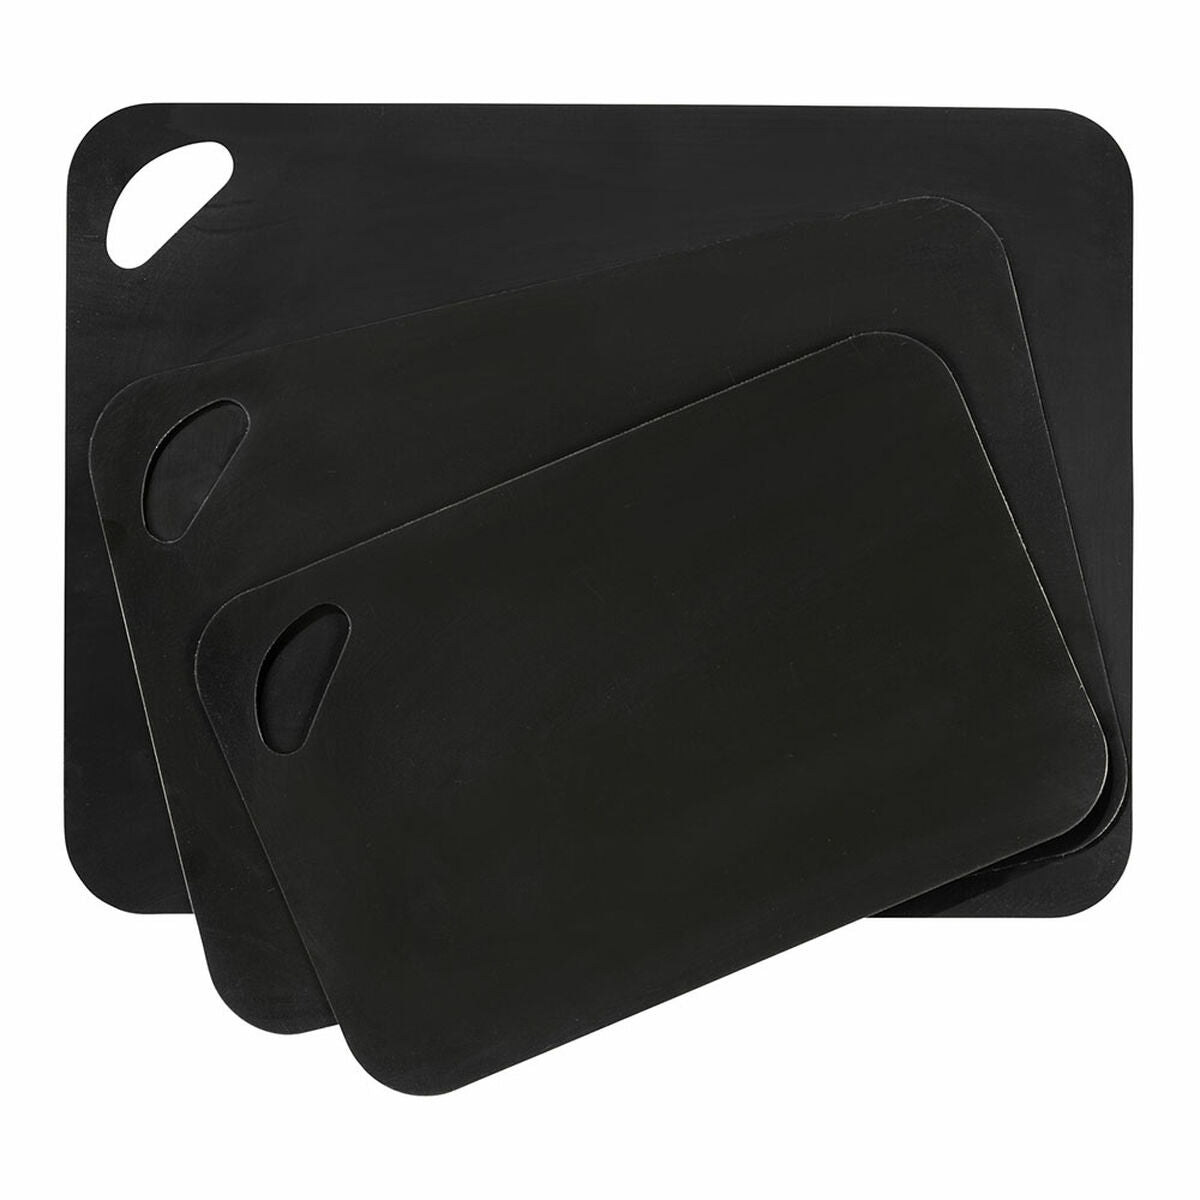 Set of chopping boards Wenko 55055100 Black Plastic (3 Pieces)